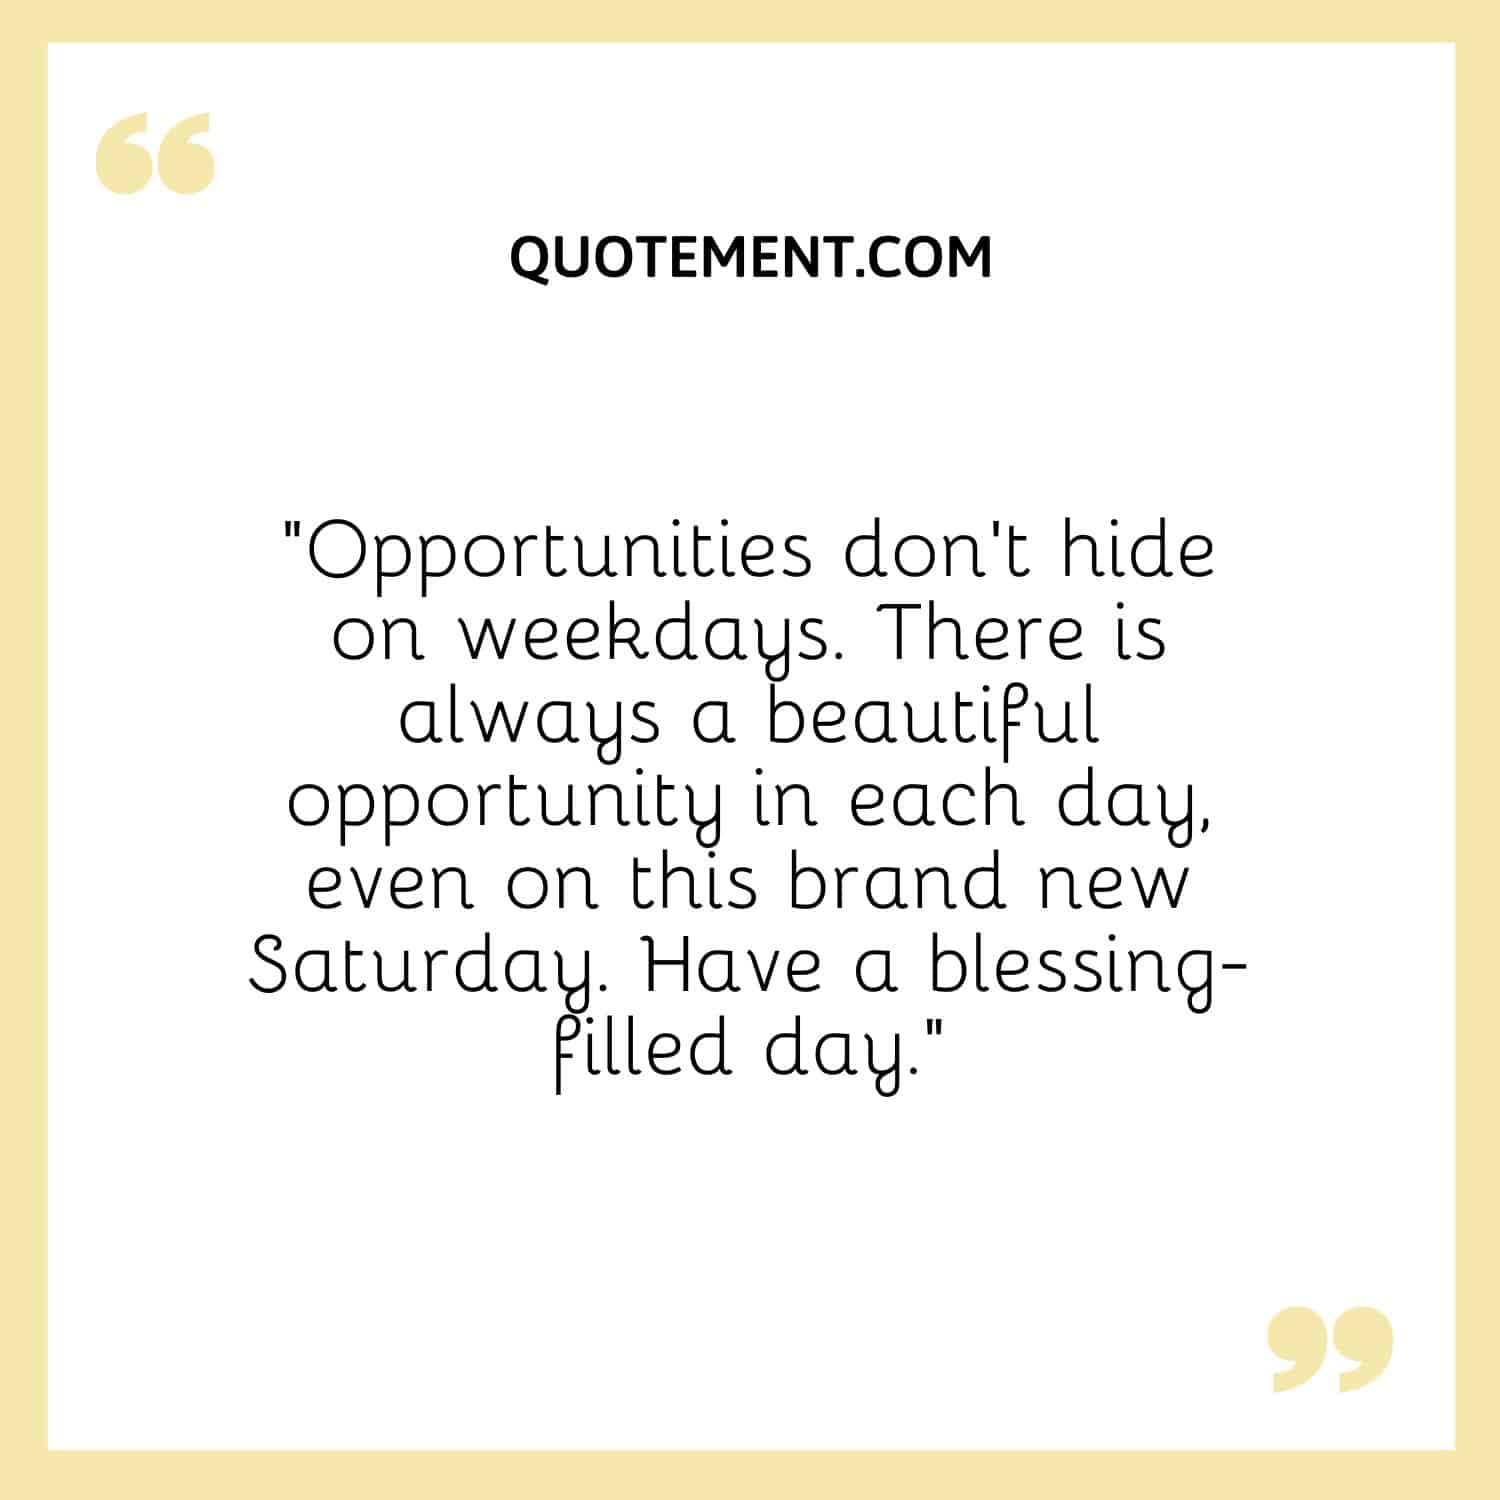 “Opportunities don’t hide on weekdays. There is always a beautiful opportunity in each day, even on this brand new Saturday. Have a blessing-filled day.”